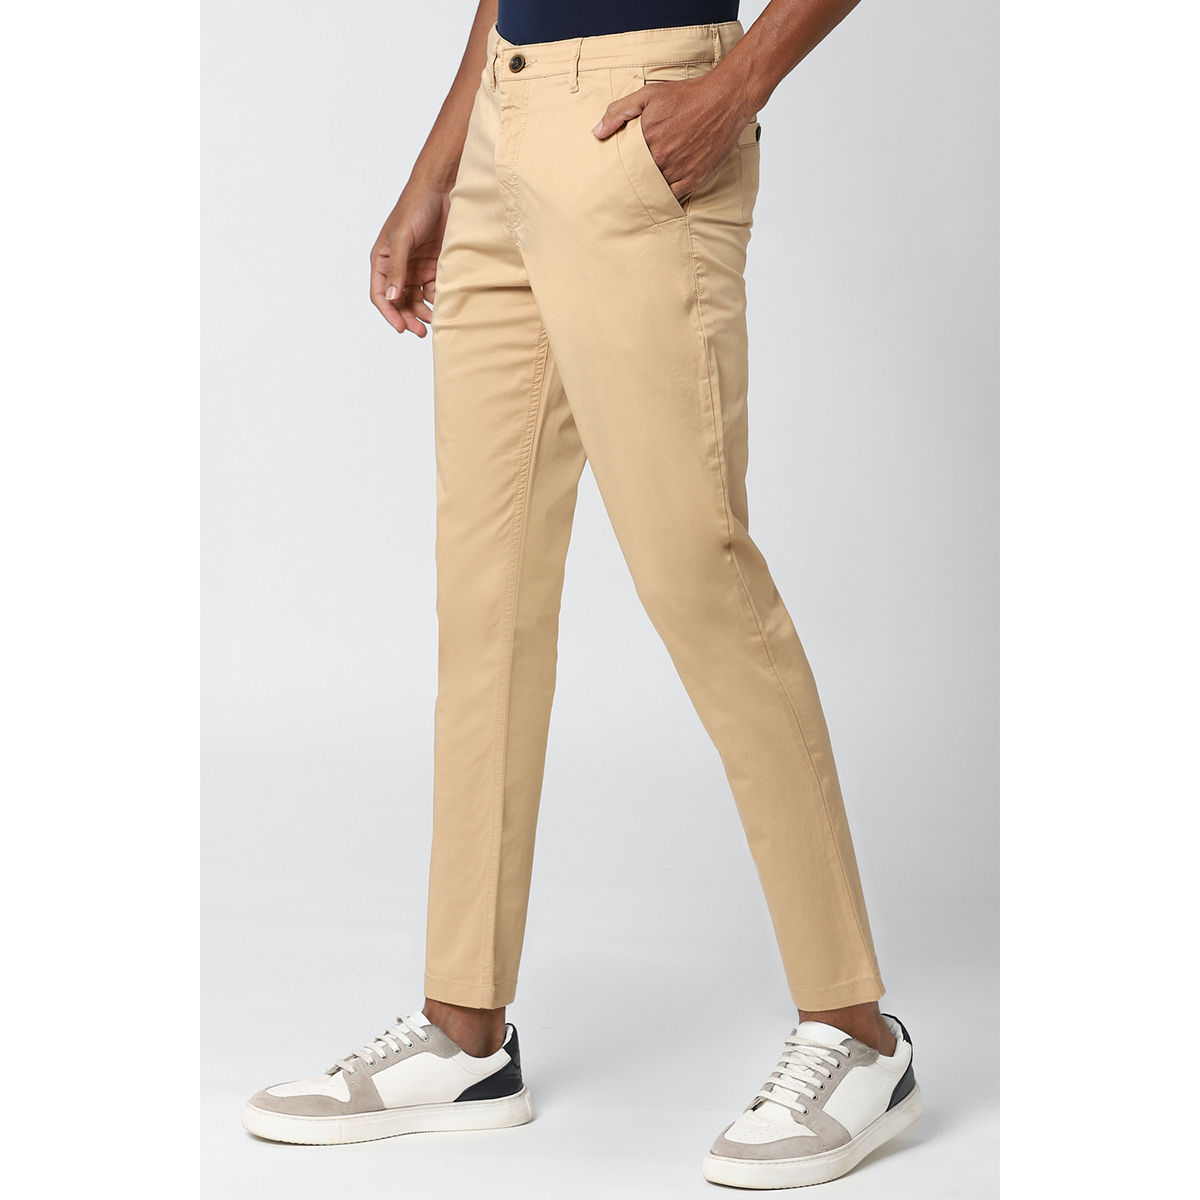 Buy Peter England Brown Slim Fit Trousers for Men Online @ Tata CLiQ